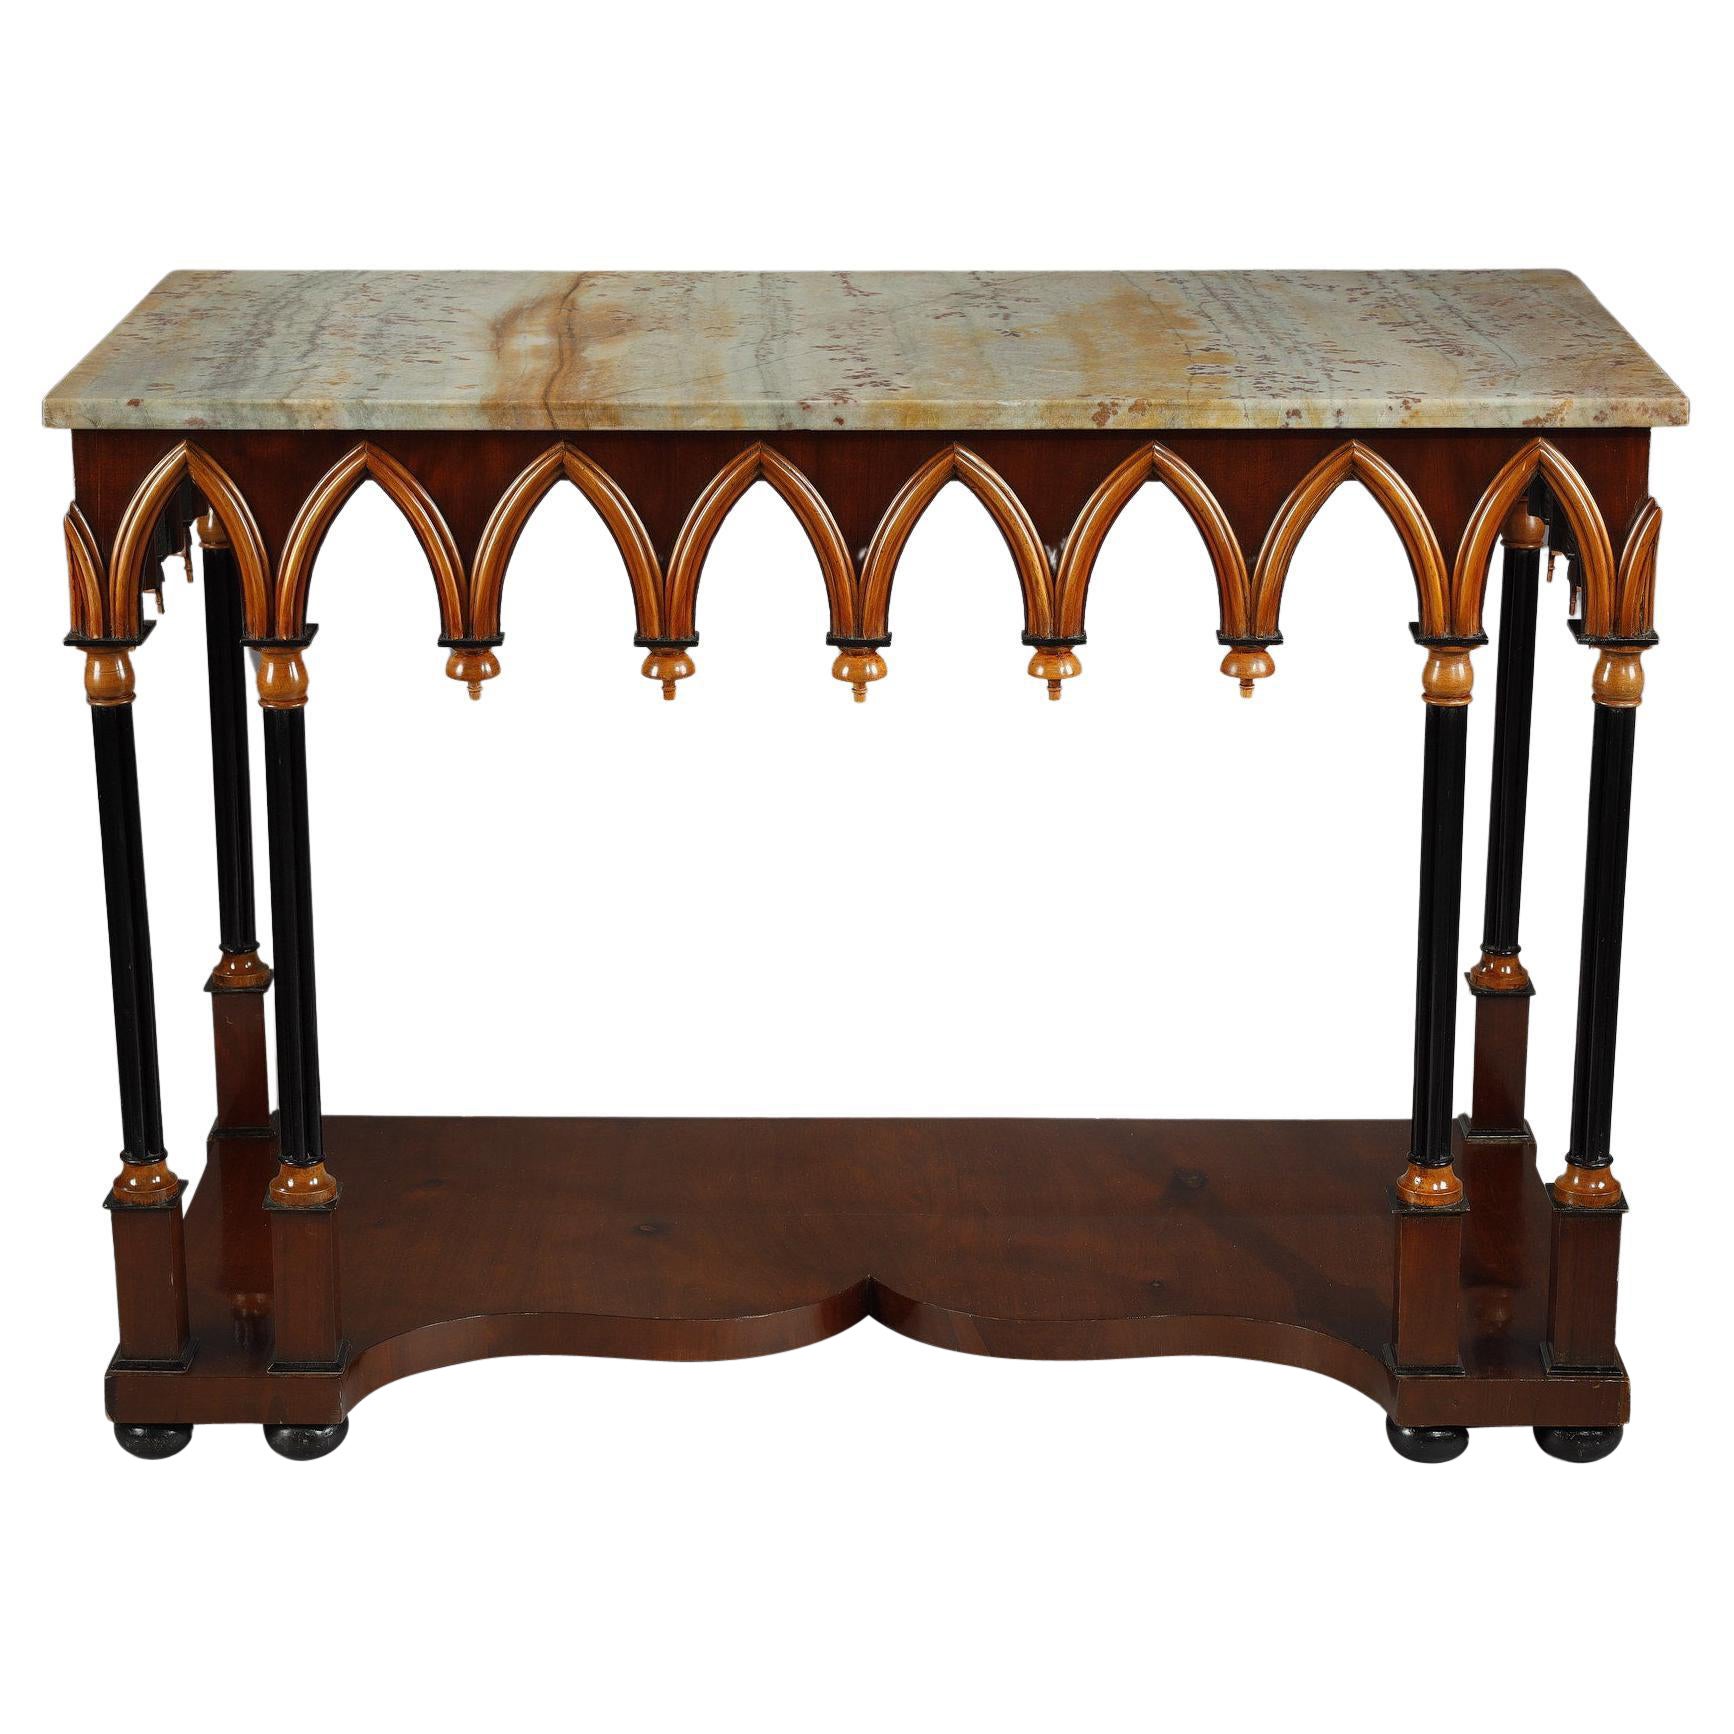 Neo-Gothic Wooden and Marble Console Table, France, circa 1830